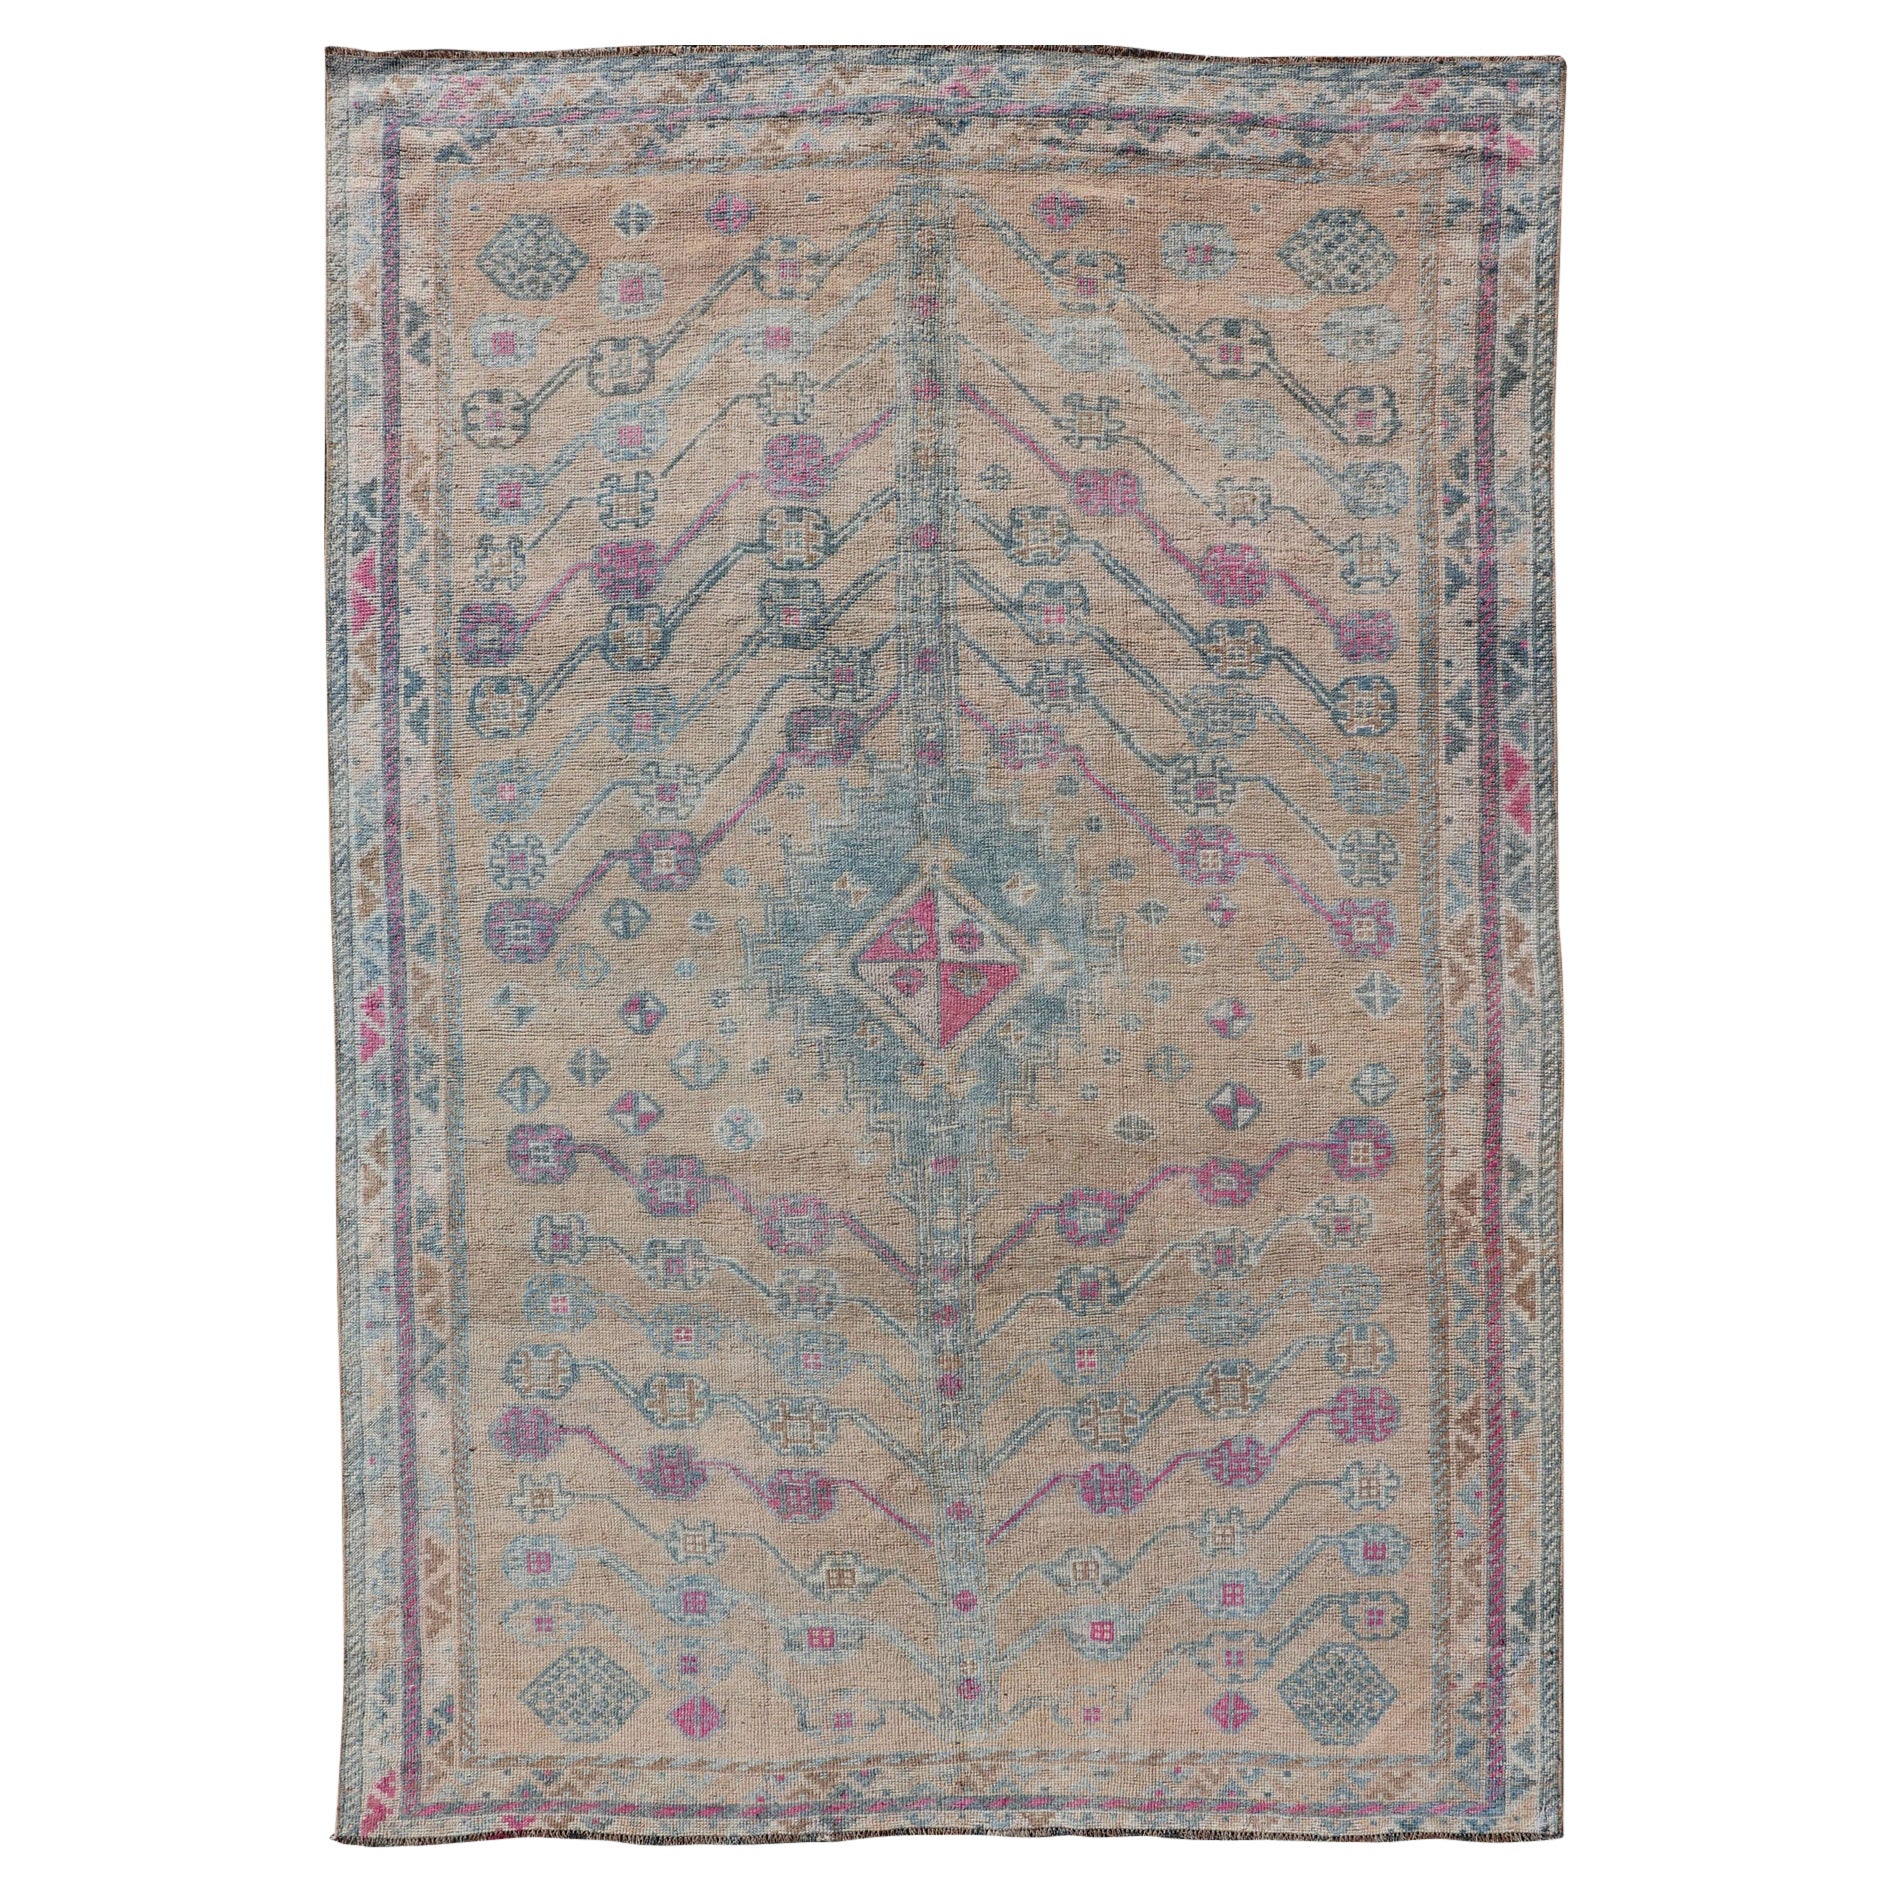 Vintage Persian Shiraz with Tribal Design in Soft Yellow, Pink, and Blue Gray